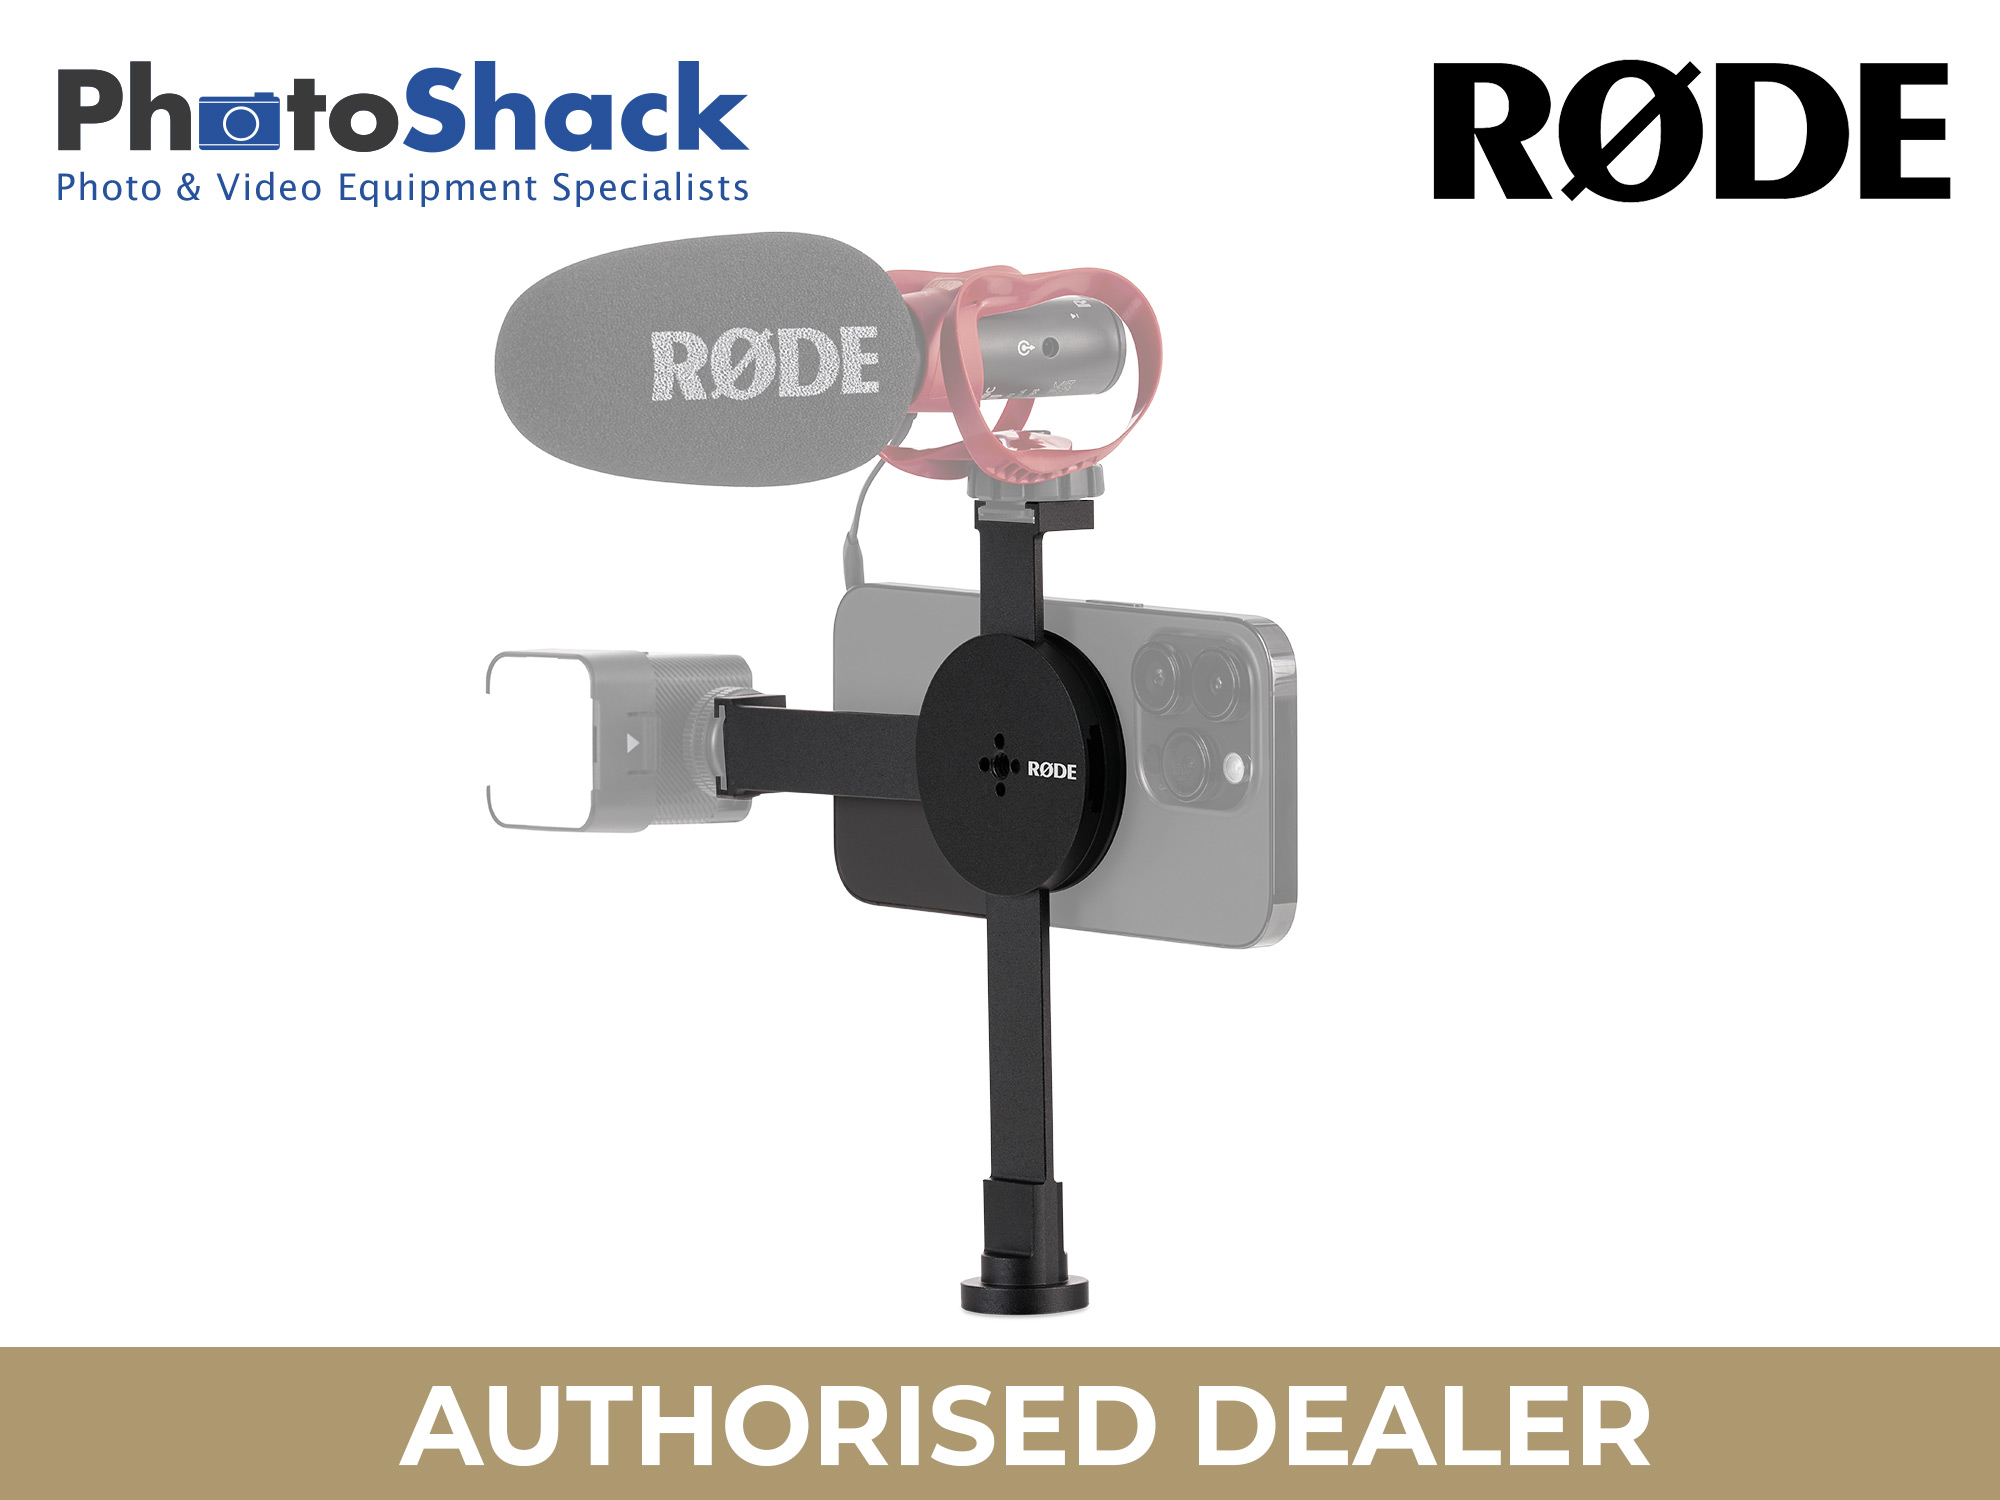 RODE MAGNETICMOUNT ADAPTOR Magnetic Smartphone Accessory Mount